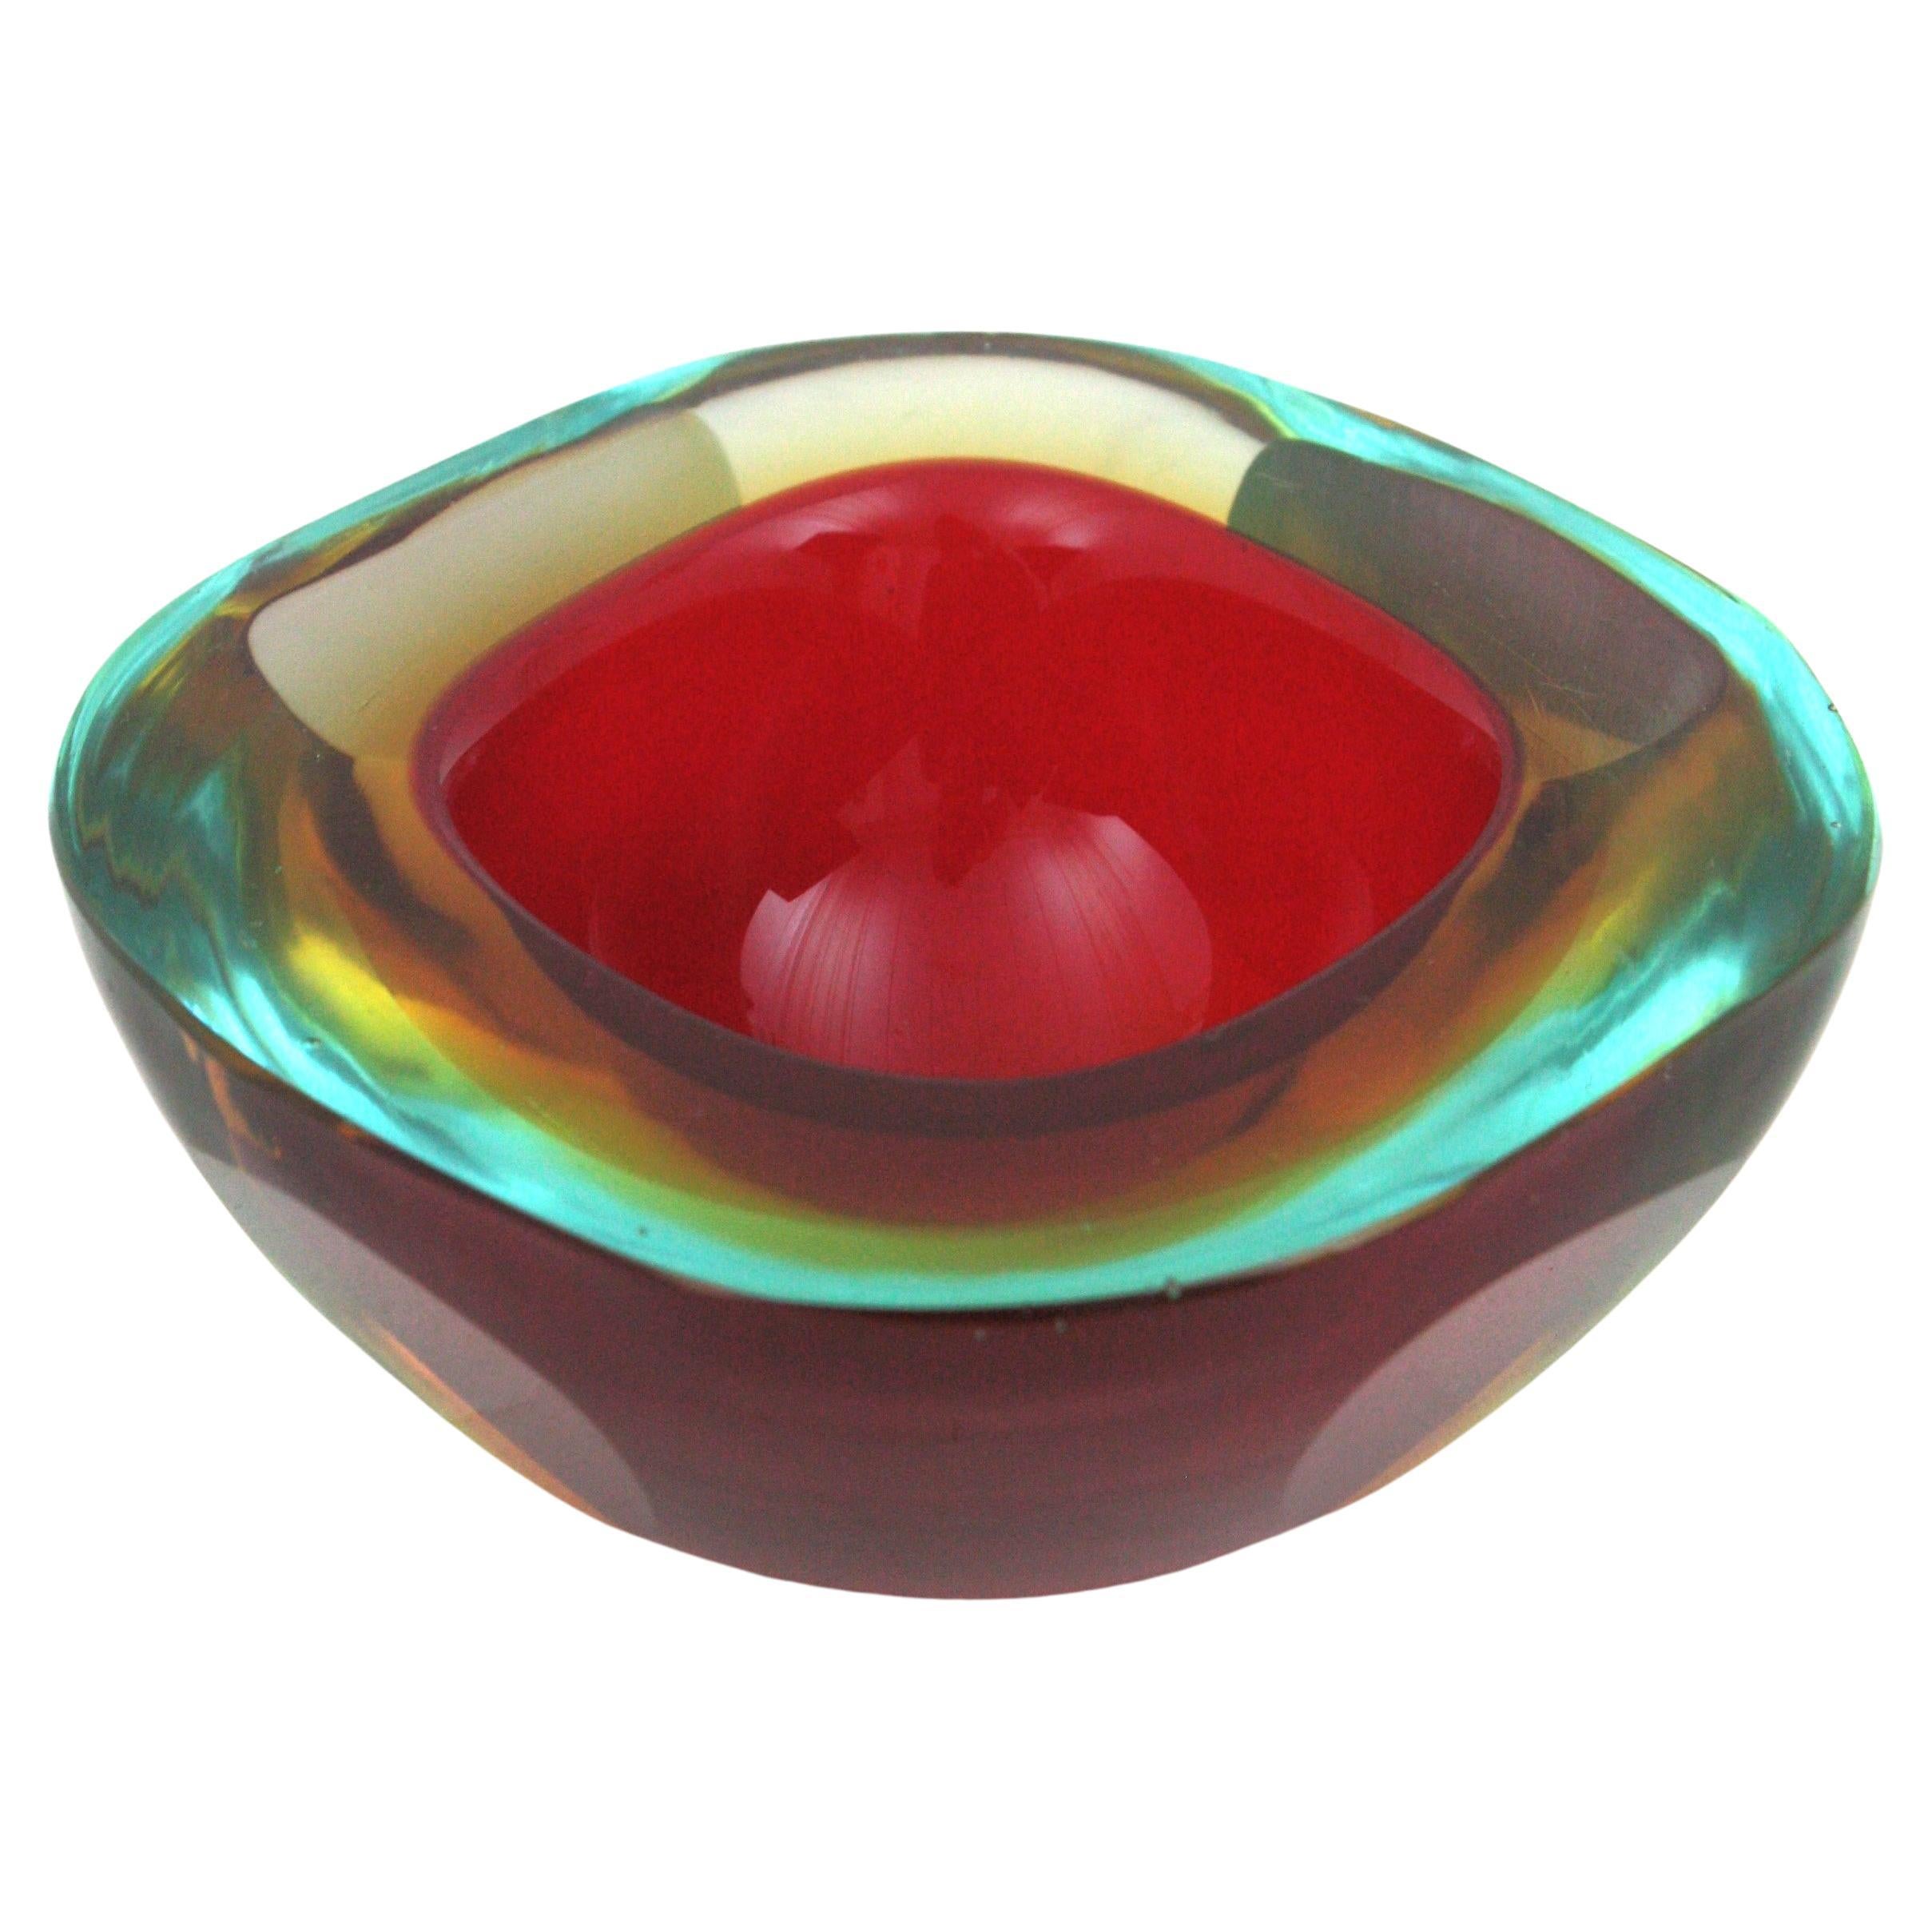 Italian Murano art glass square shaped geode bowl attributed to Flavio Poli for Seguso Vetri d'Arte. Italy, 1950s.
Beautiful hand blown Murano glass piece combining yellow, blue and red glass with Sommerso technique. 
This bowl can also be used as